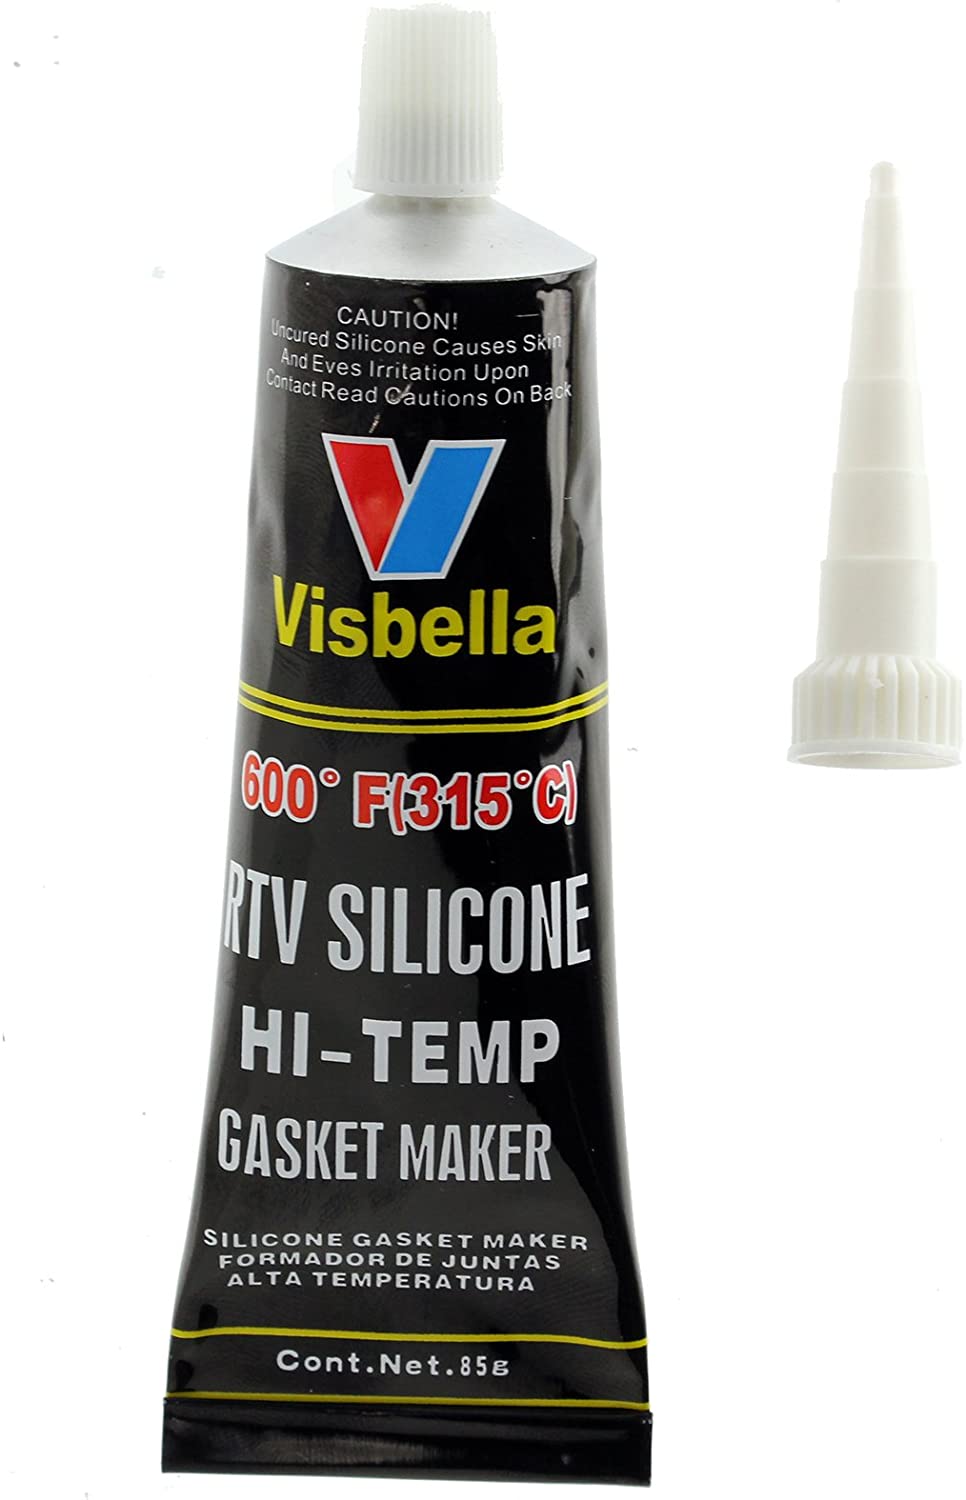 Oven Glass Door Glue Seal High Temperature Hi Temp Resistant Silicone -80ºF to 600ºF (Pack of 2)